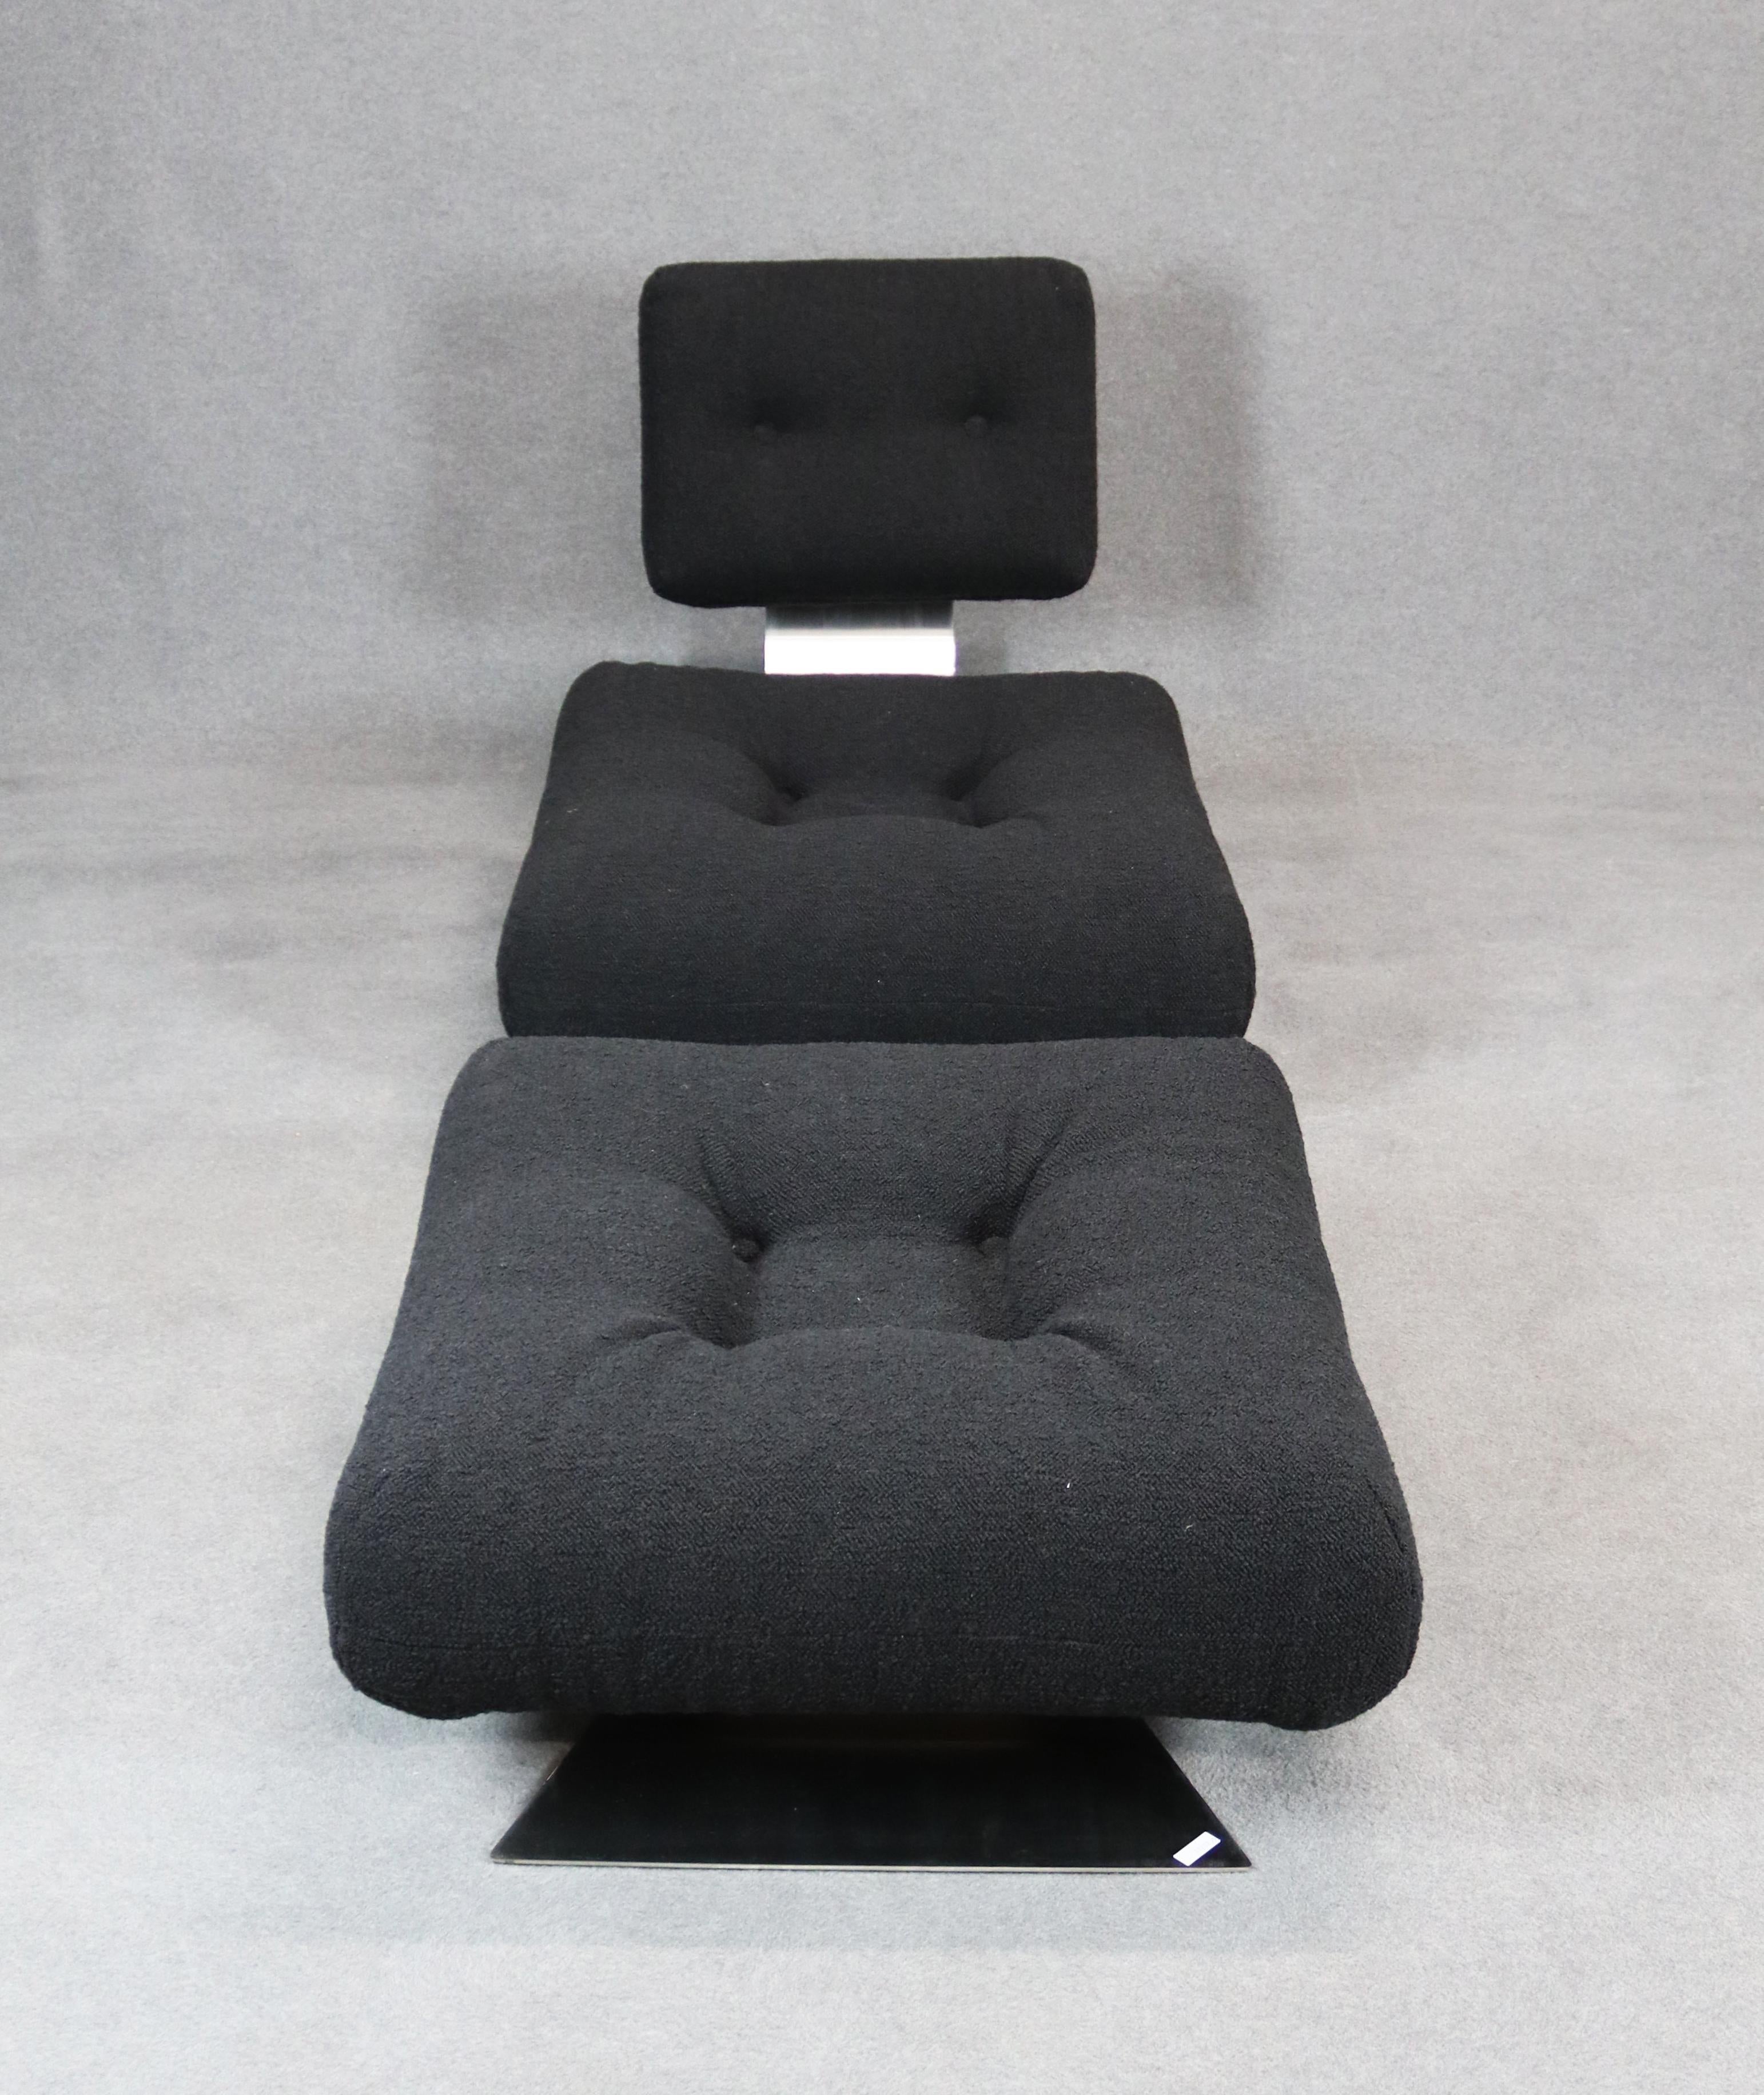 Oscar Niemeyer, Rio de Janeiro, 1907-2012. High armchair with footrest. Version with low seat in satin stainless steel, fabric and Bakelite knobs, 1974. With 'Mobilier International' sticker under the seat of both.